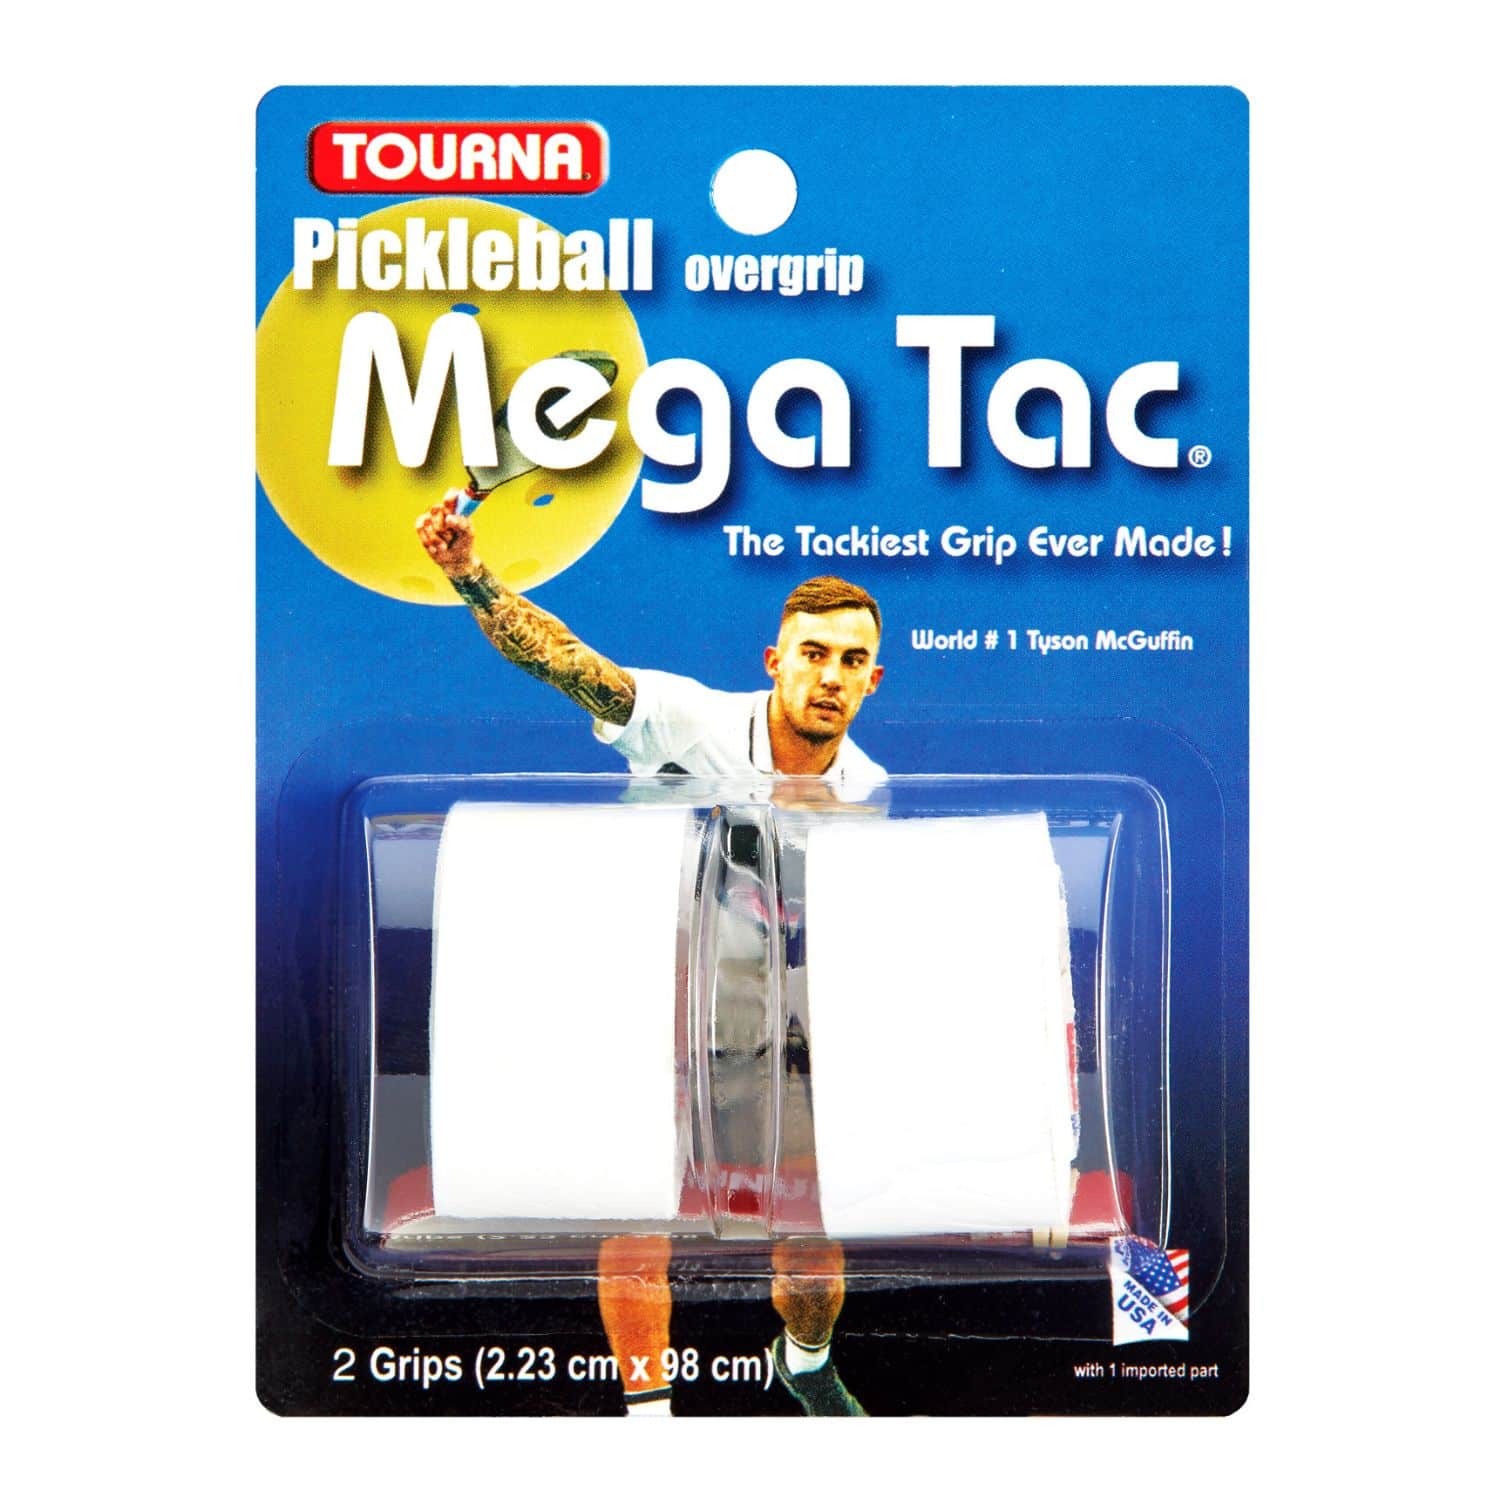 Tourna - Pickleball Cushion Grip - BLACK for Pickleball Paddles   Provides A Plush Shock Absorbing Replacement Grip For Your Pickleball  Handle!